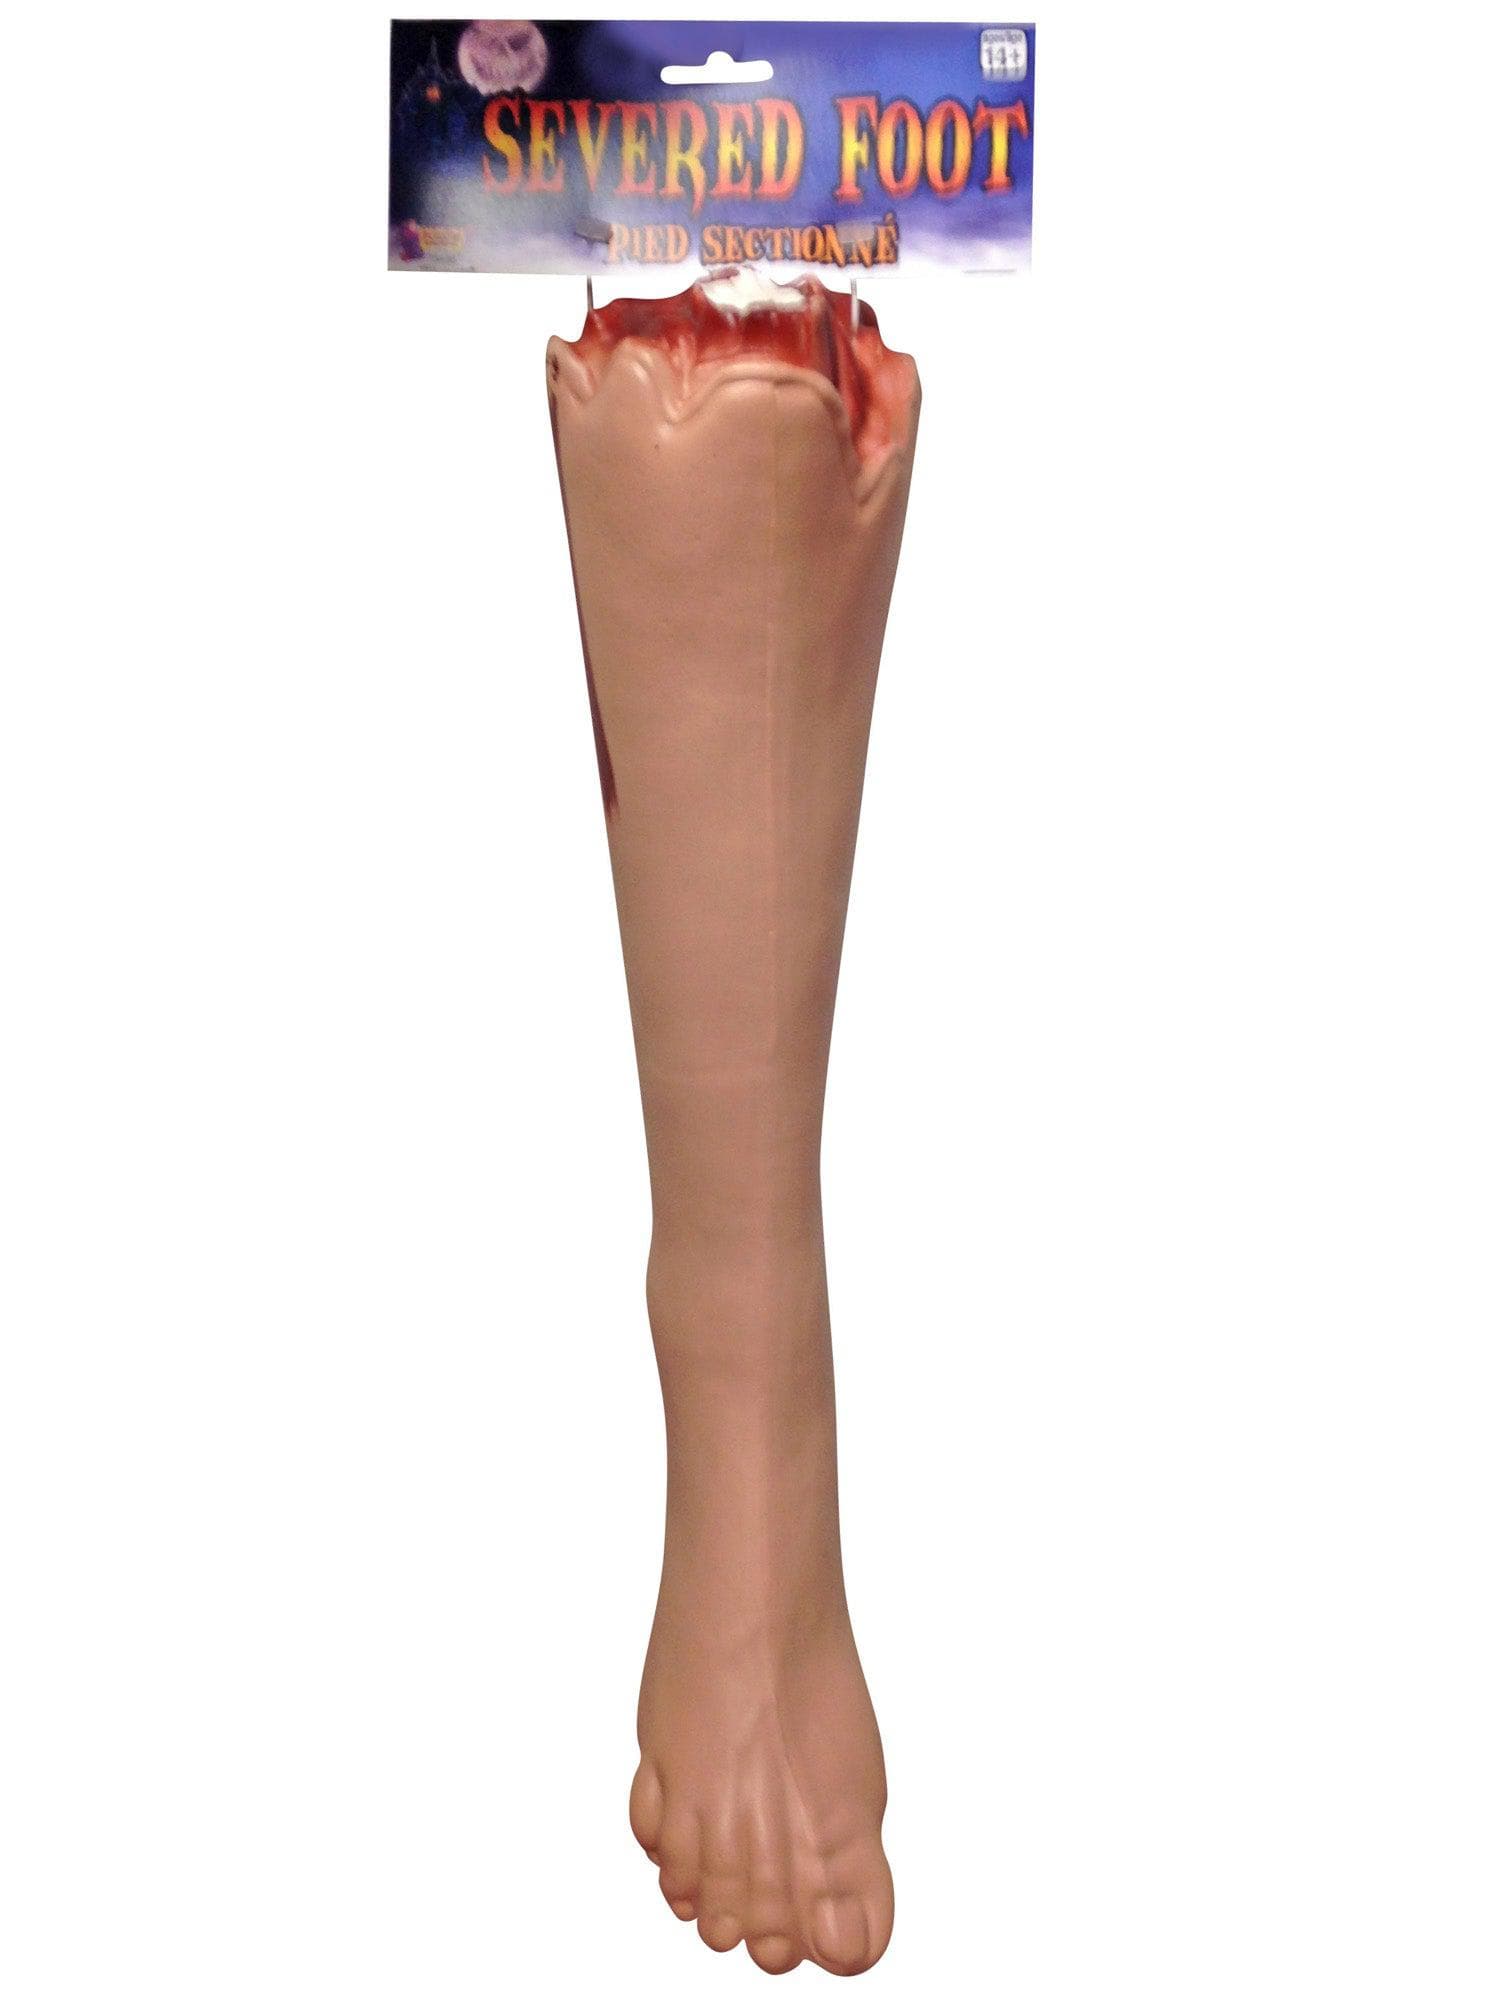 18-inch Bloody Severed Leg Prop - costumes.com